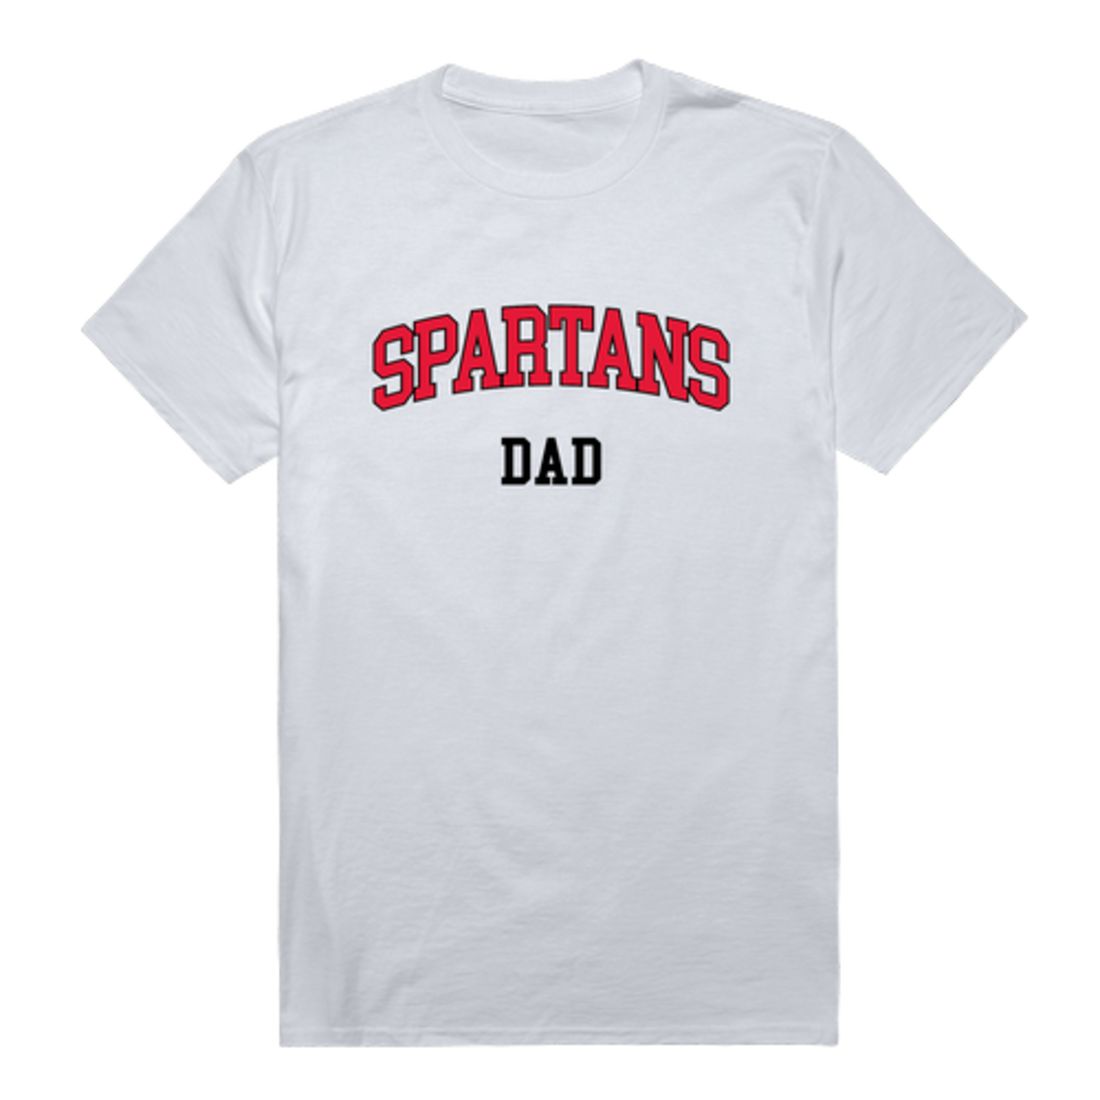 University of Tampa Spartans Dad T-Shirt